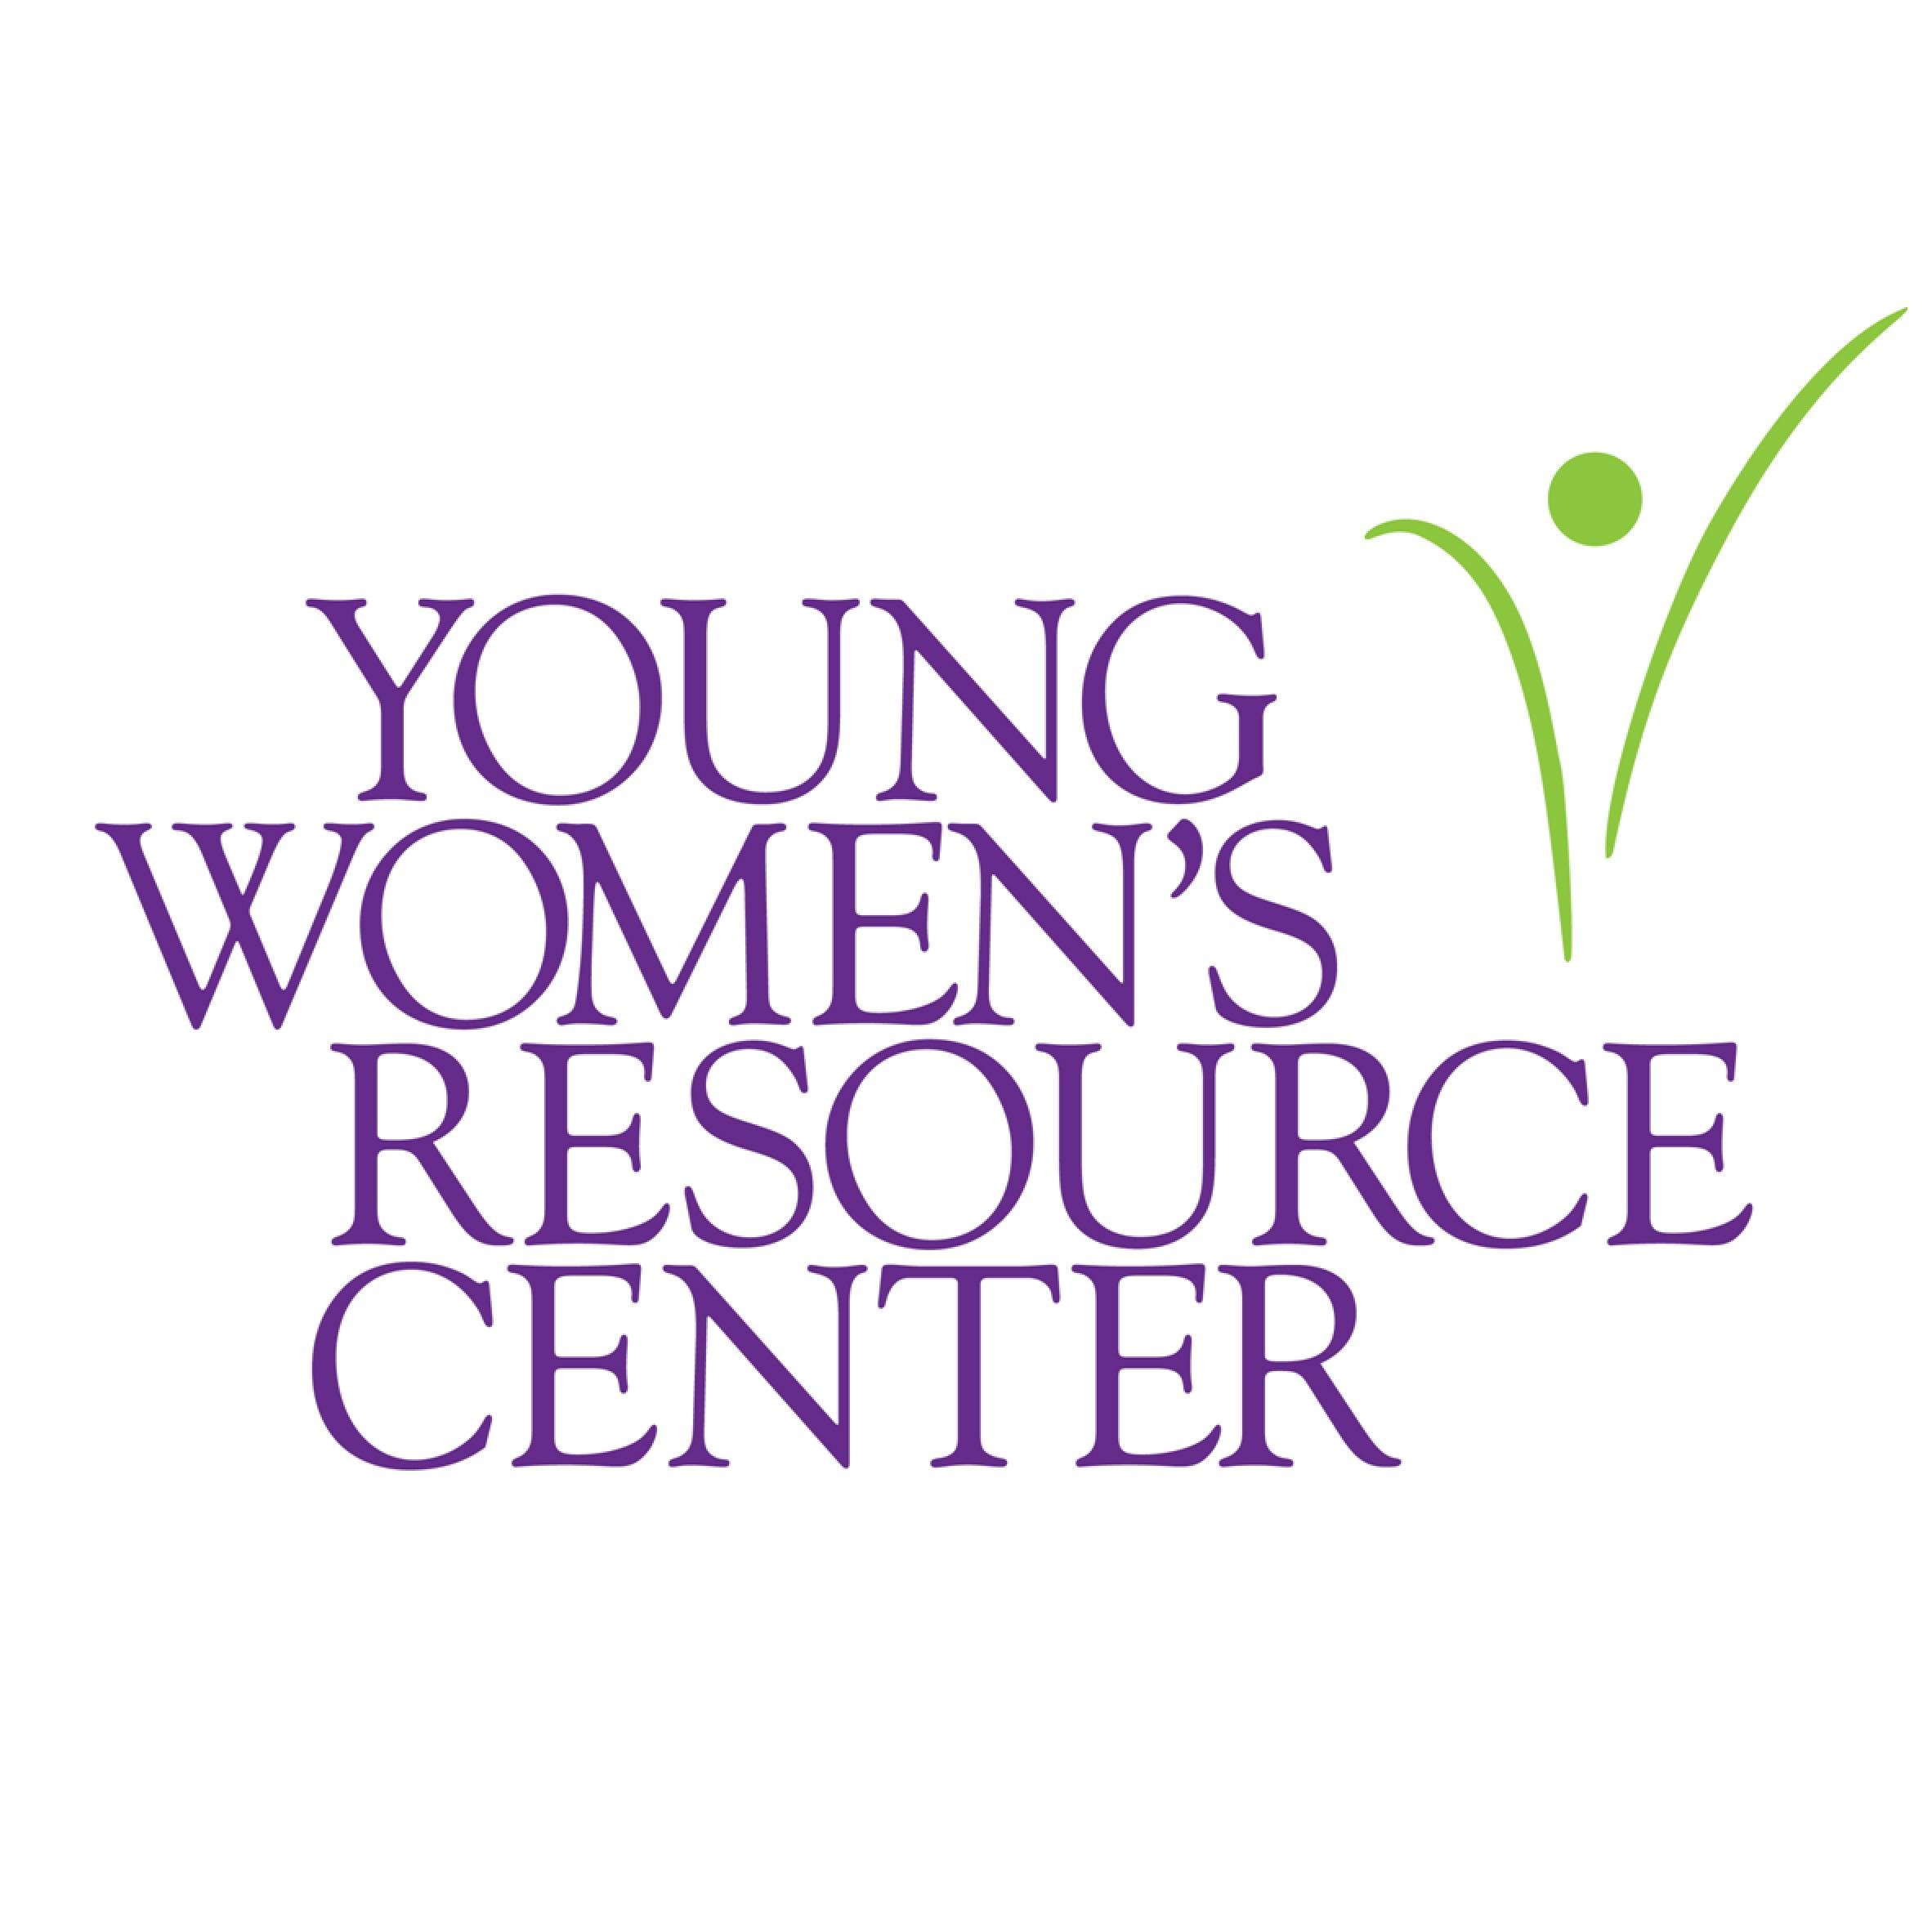 The Young Women's Resource Center works to empower participants to be strong, self-confident and resilient.